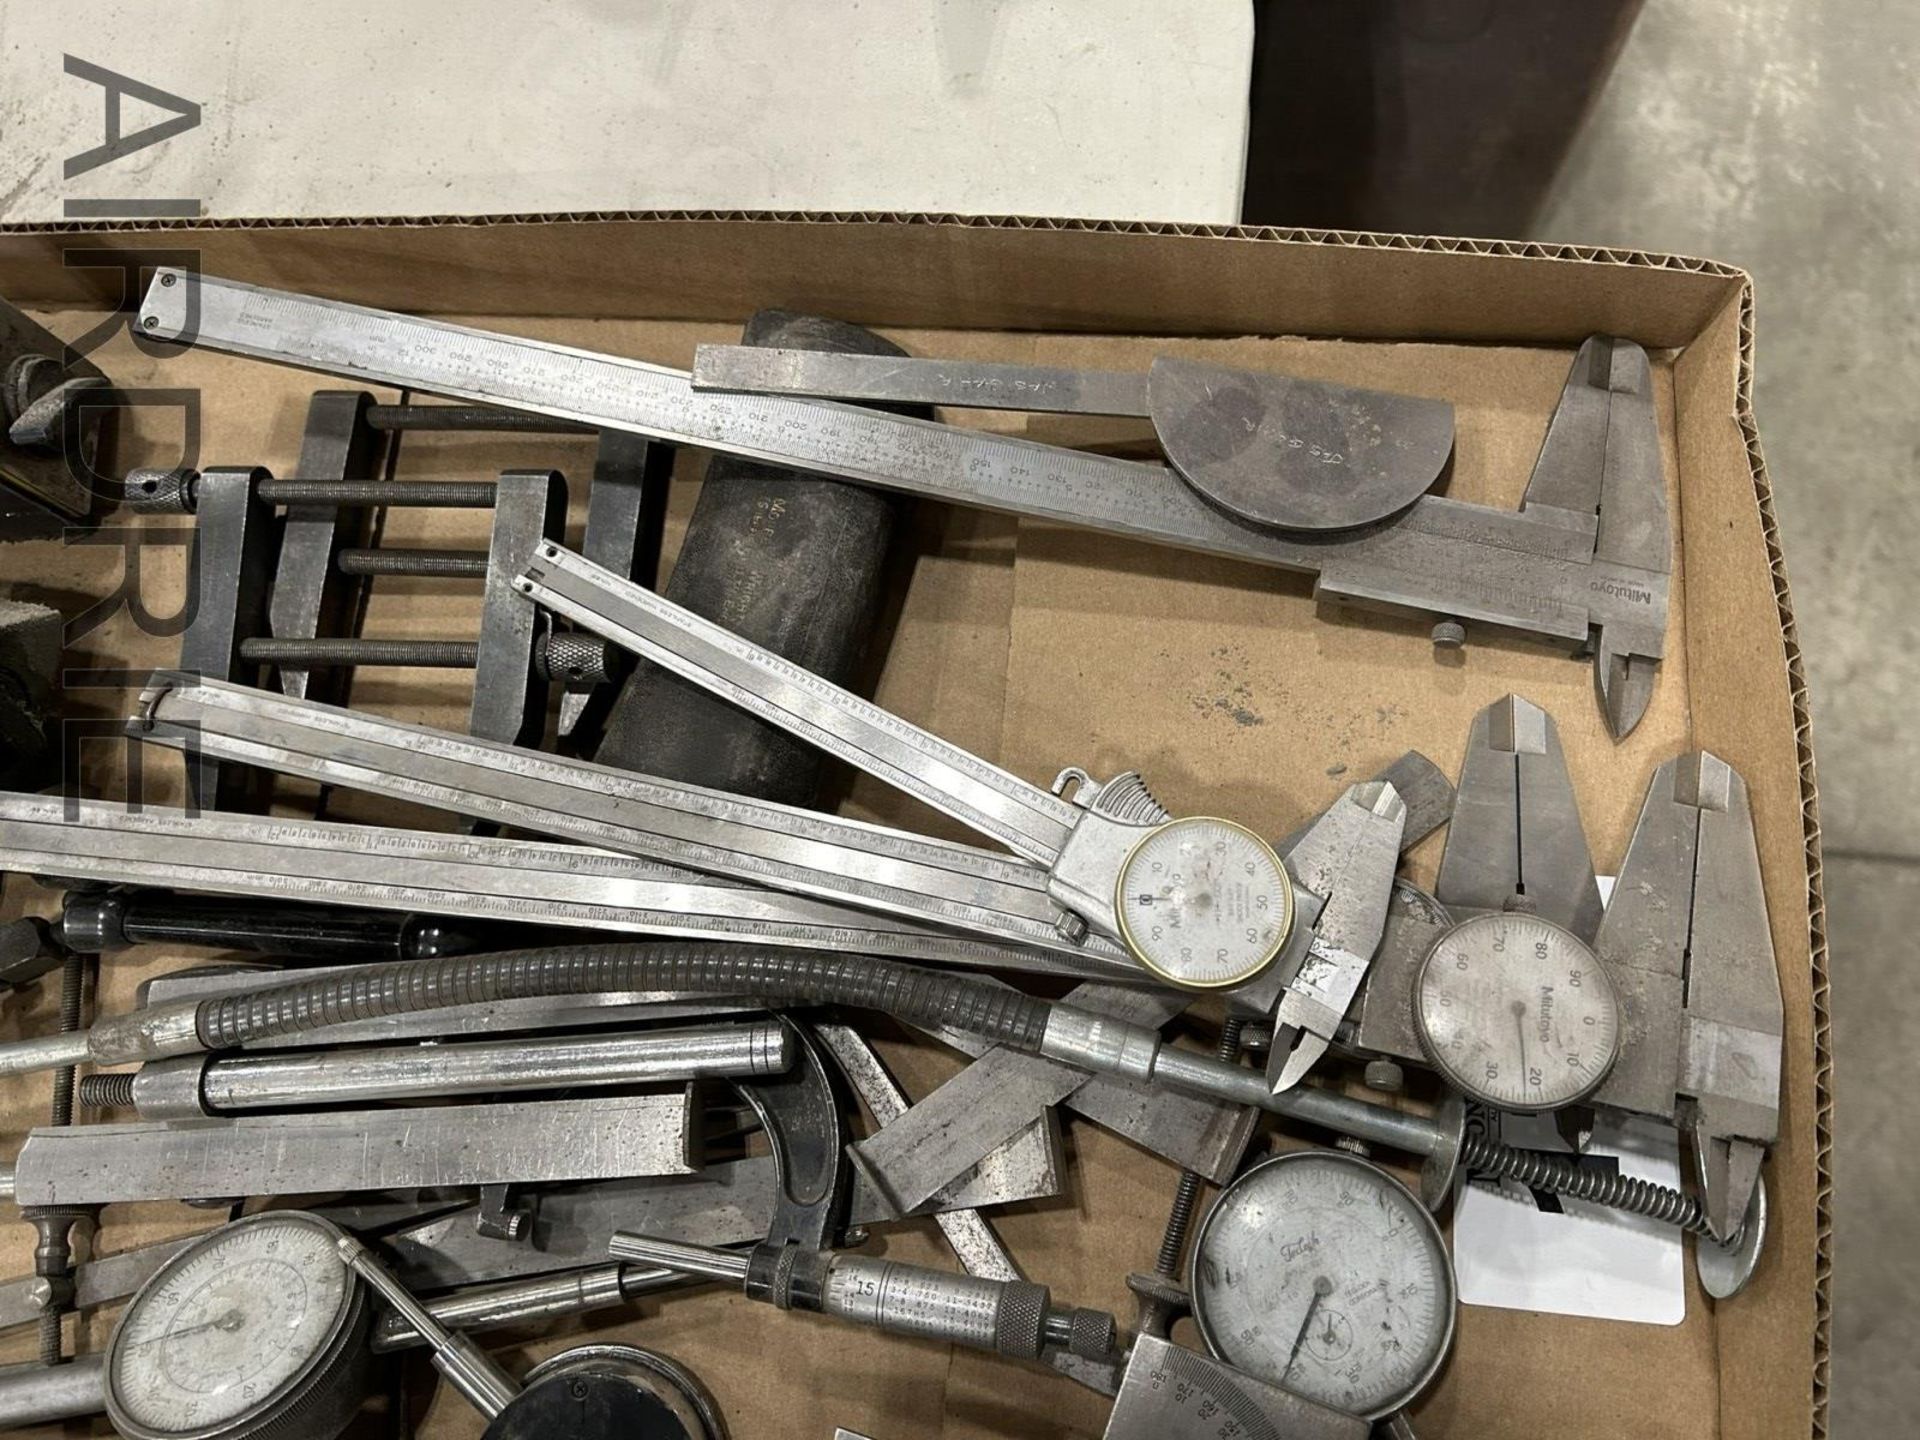 *OFFSITE* L/O ASSORTED MICROMETERS, CALIPERS, METRE STICKS, ETC. - Image 2 of 5